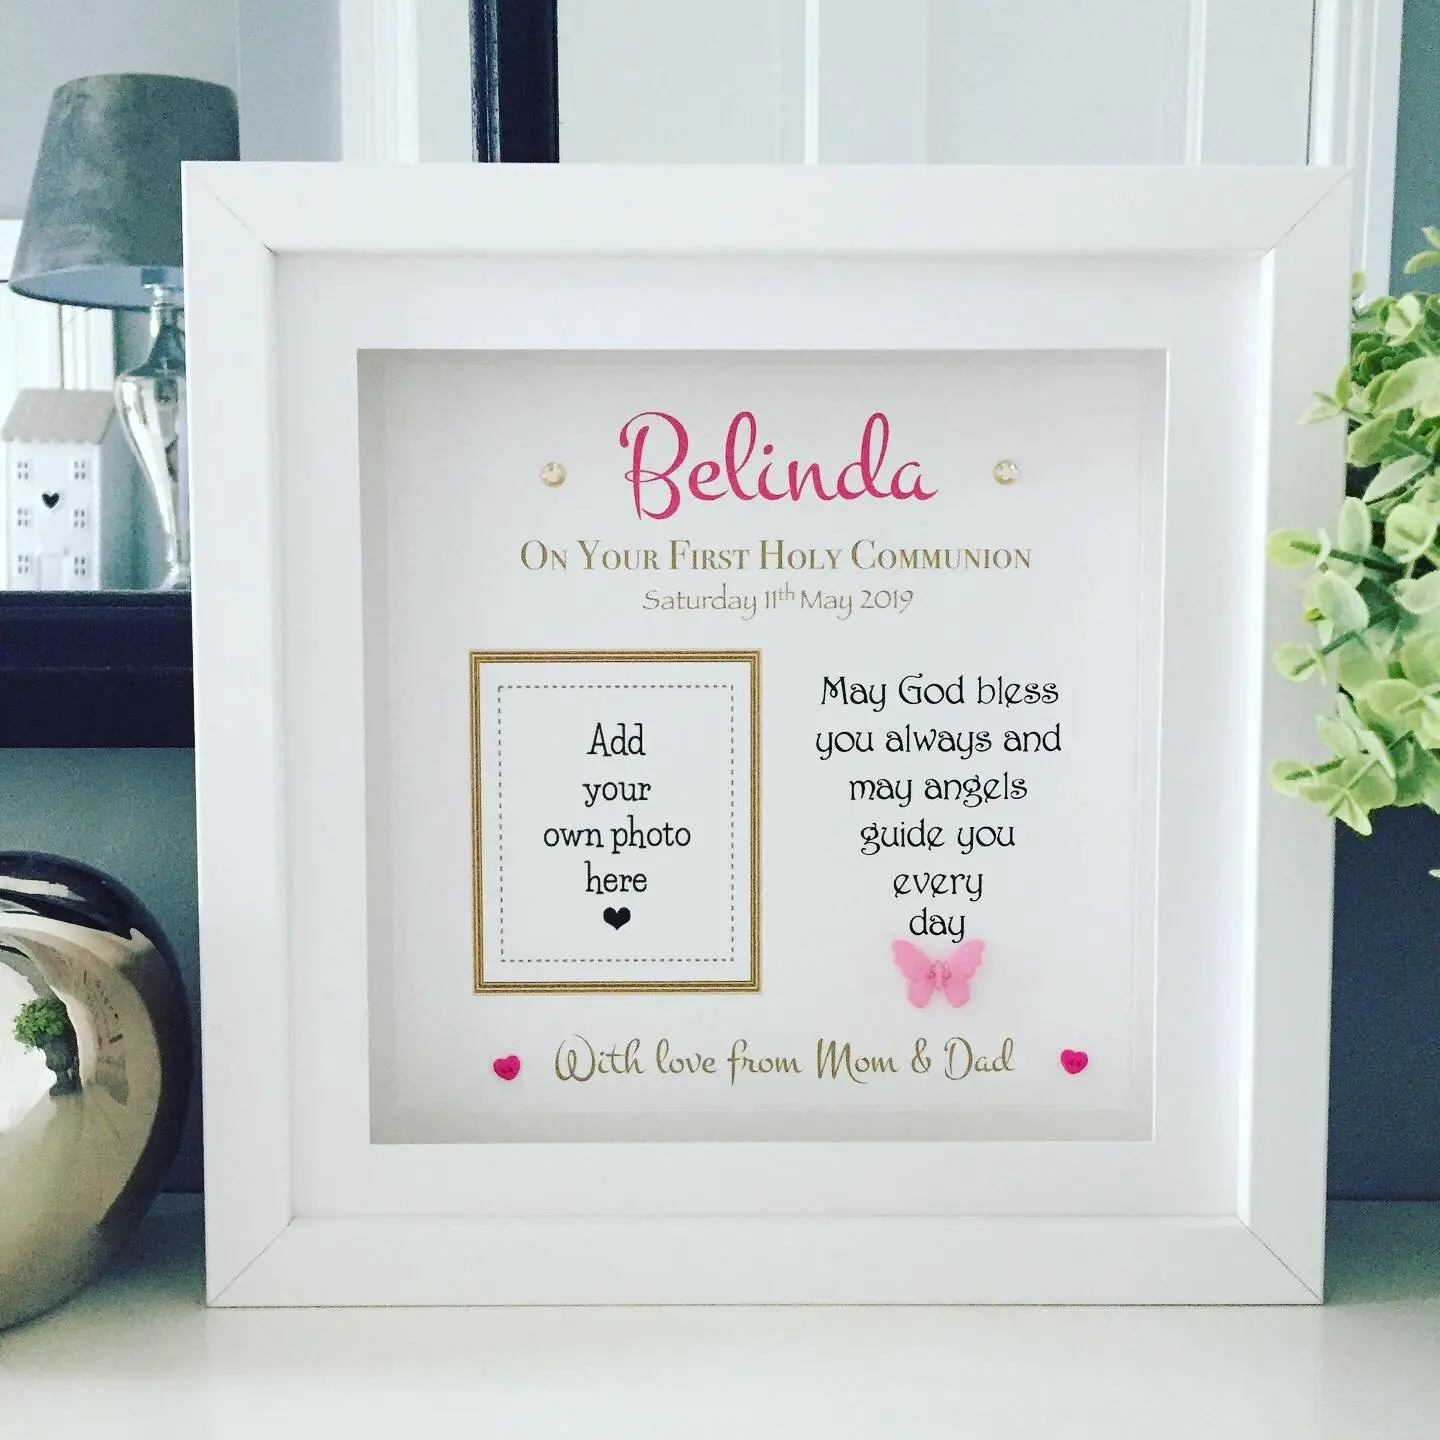 Photo Frames Sisters my first year engagement hen night bridesmaid silver family